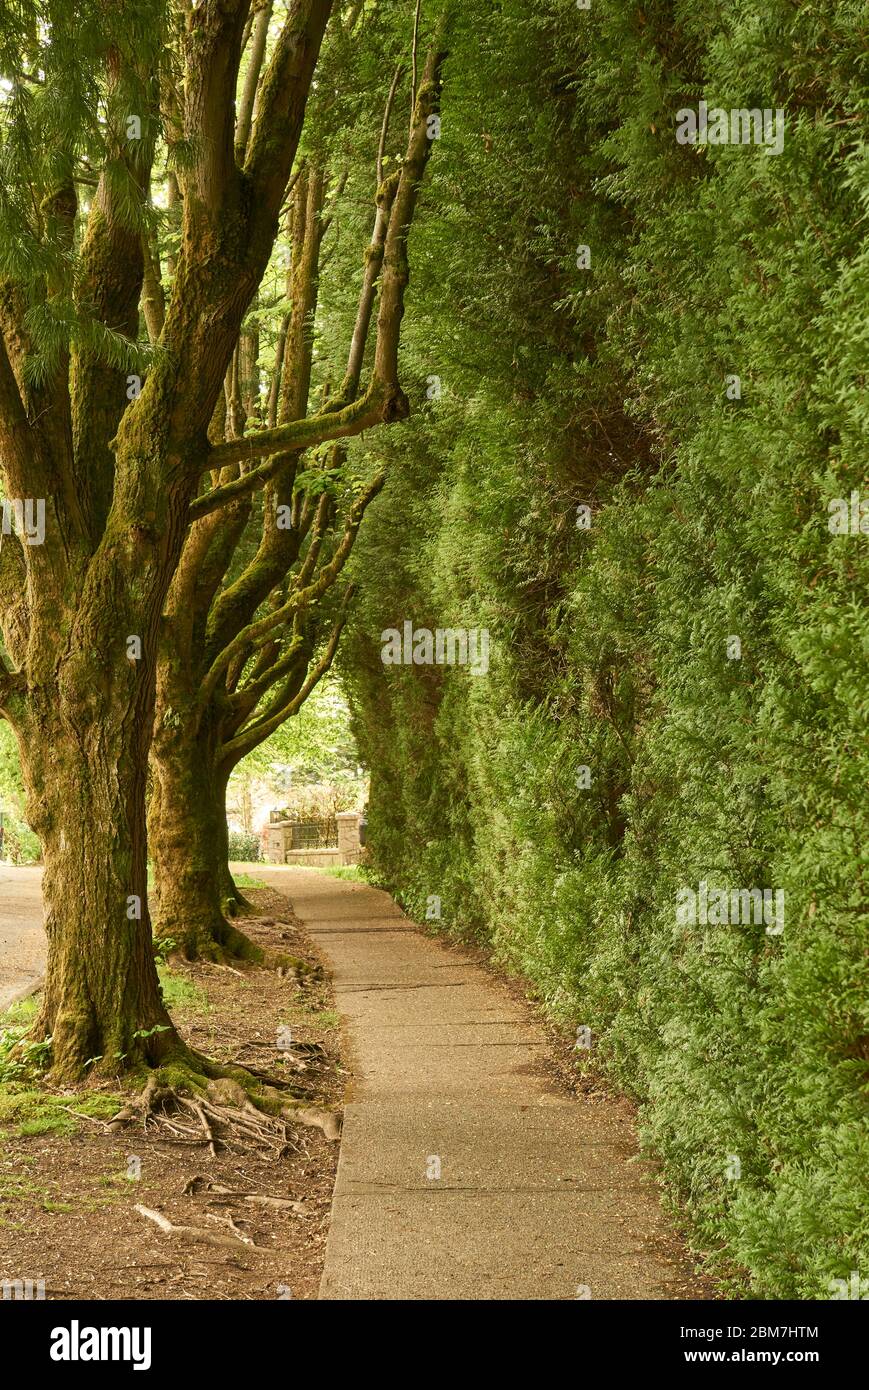 Empty sidewalk path leading through trees and bushes Stock Photo